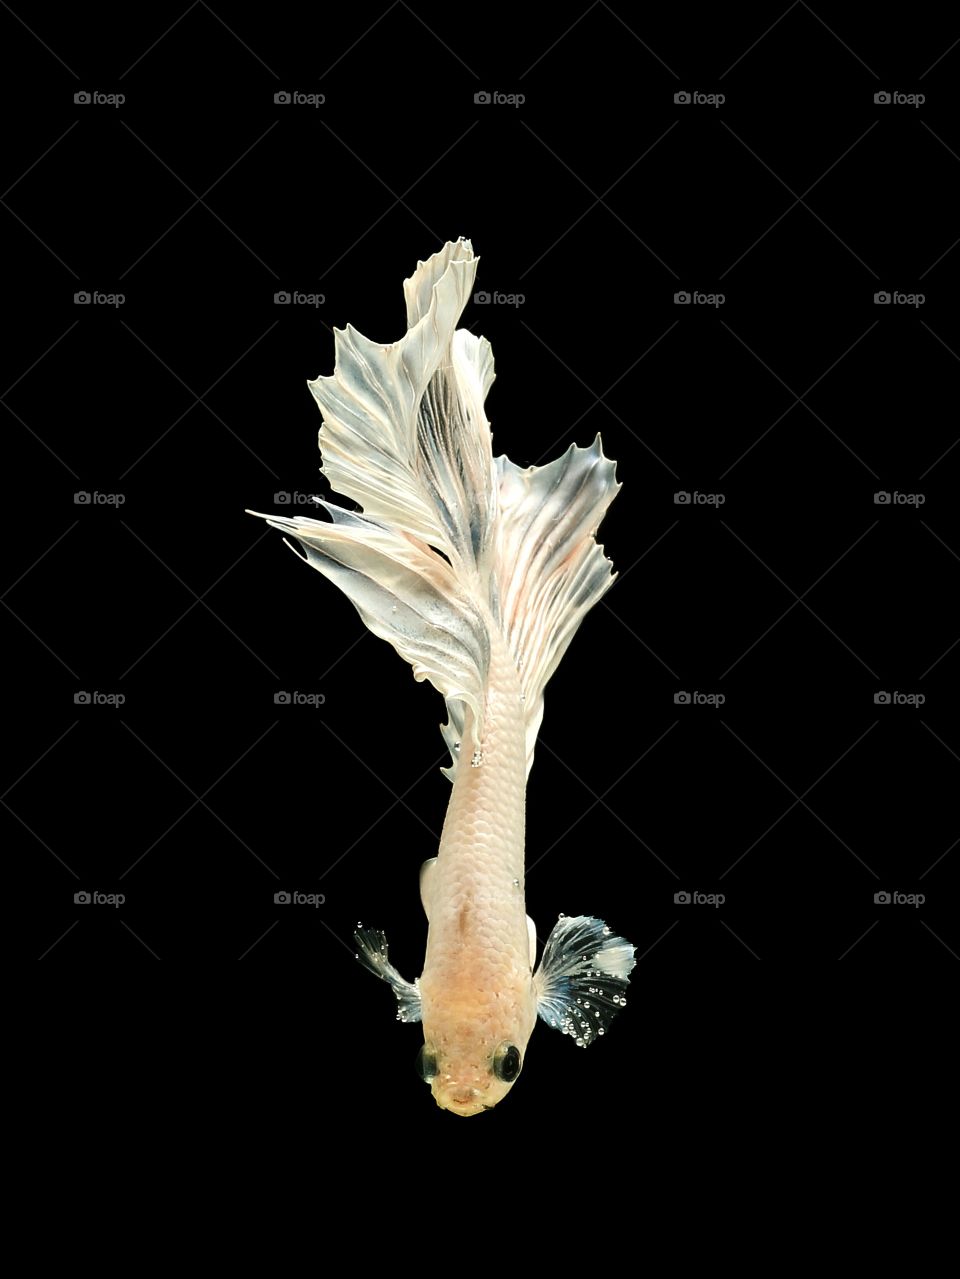 STRAIGHT DOWN
WHITE HALFMOON BETTA FISH
WITH BLACK OR DARK BACKGROUND THE COLOUR IS ALL OUT